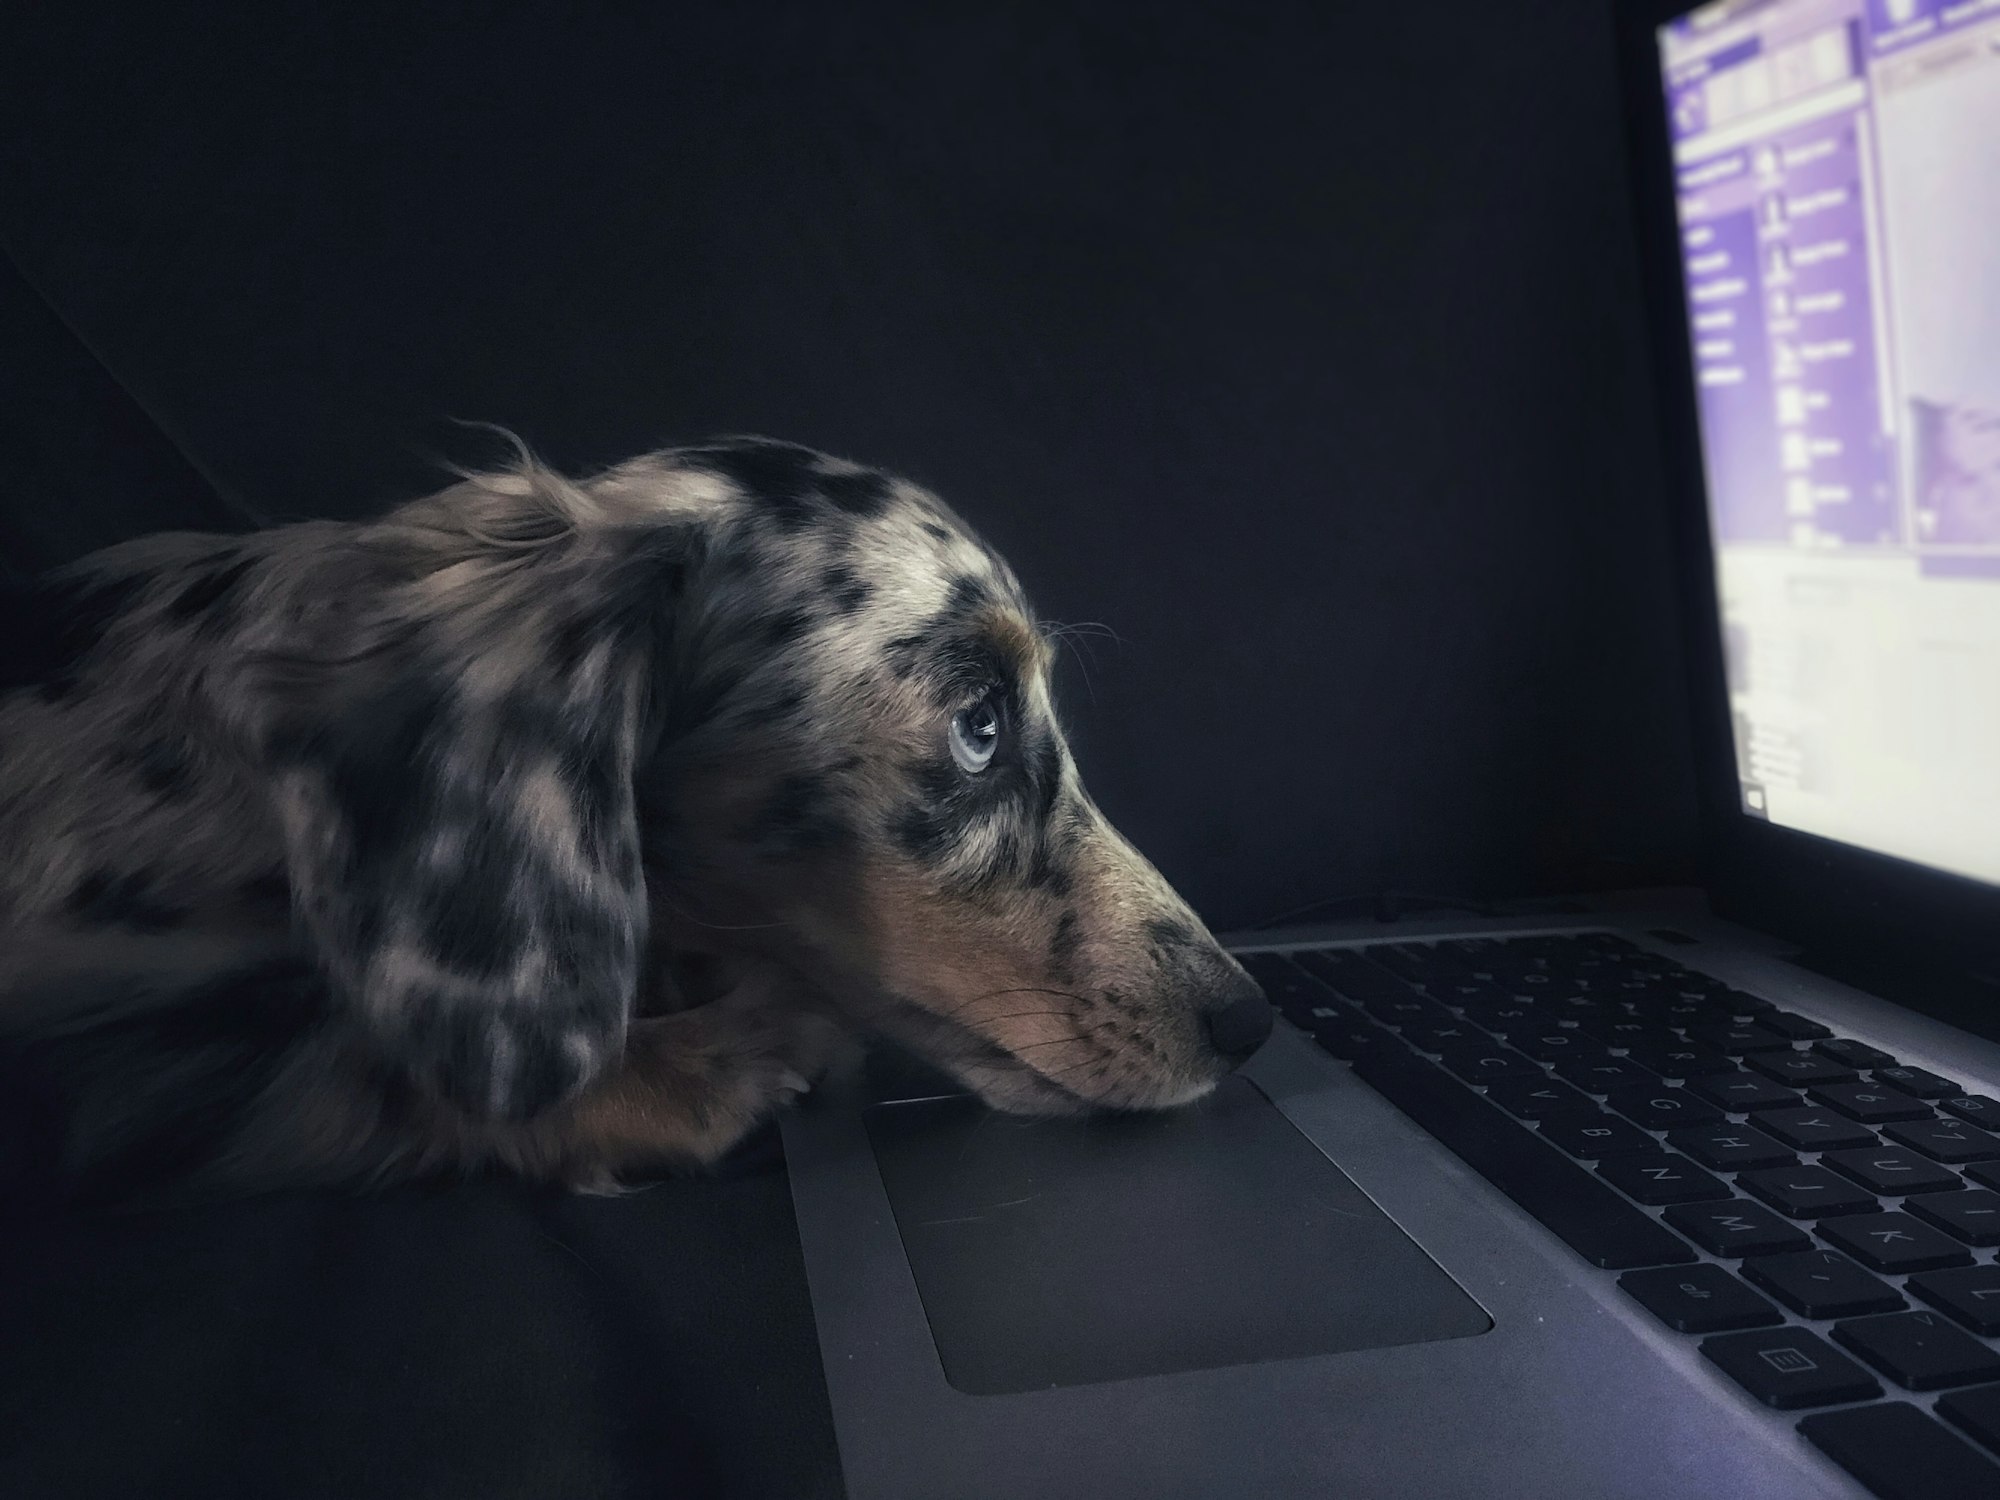 Our puppy Winston is always curious, especially with everything we’re doing.  Fairly often he wants right up close to the laptop when I have it on my lap.  This day I had it on the couch where he was and his curiosity with the screen allowed me to make this photo.